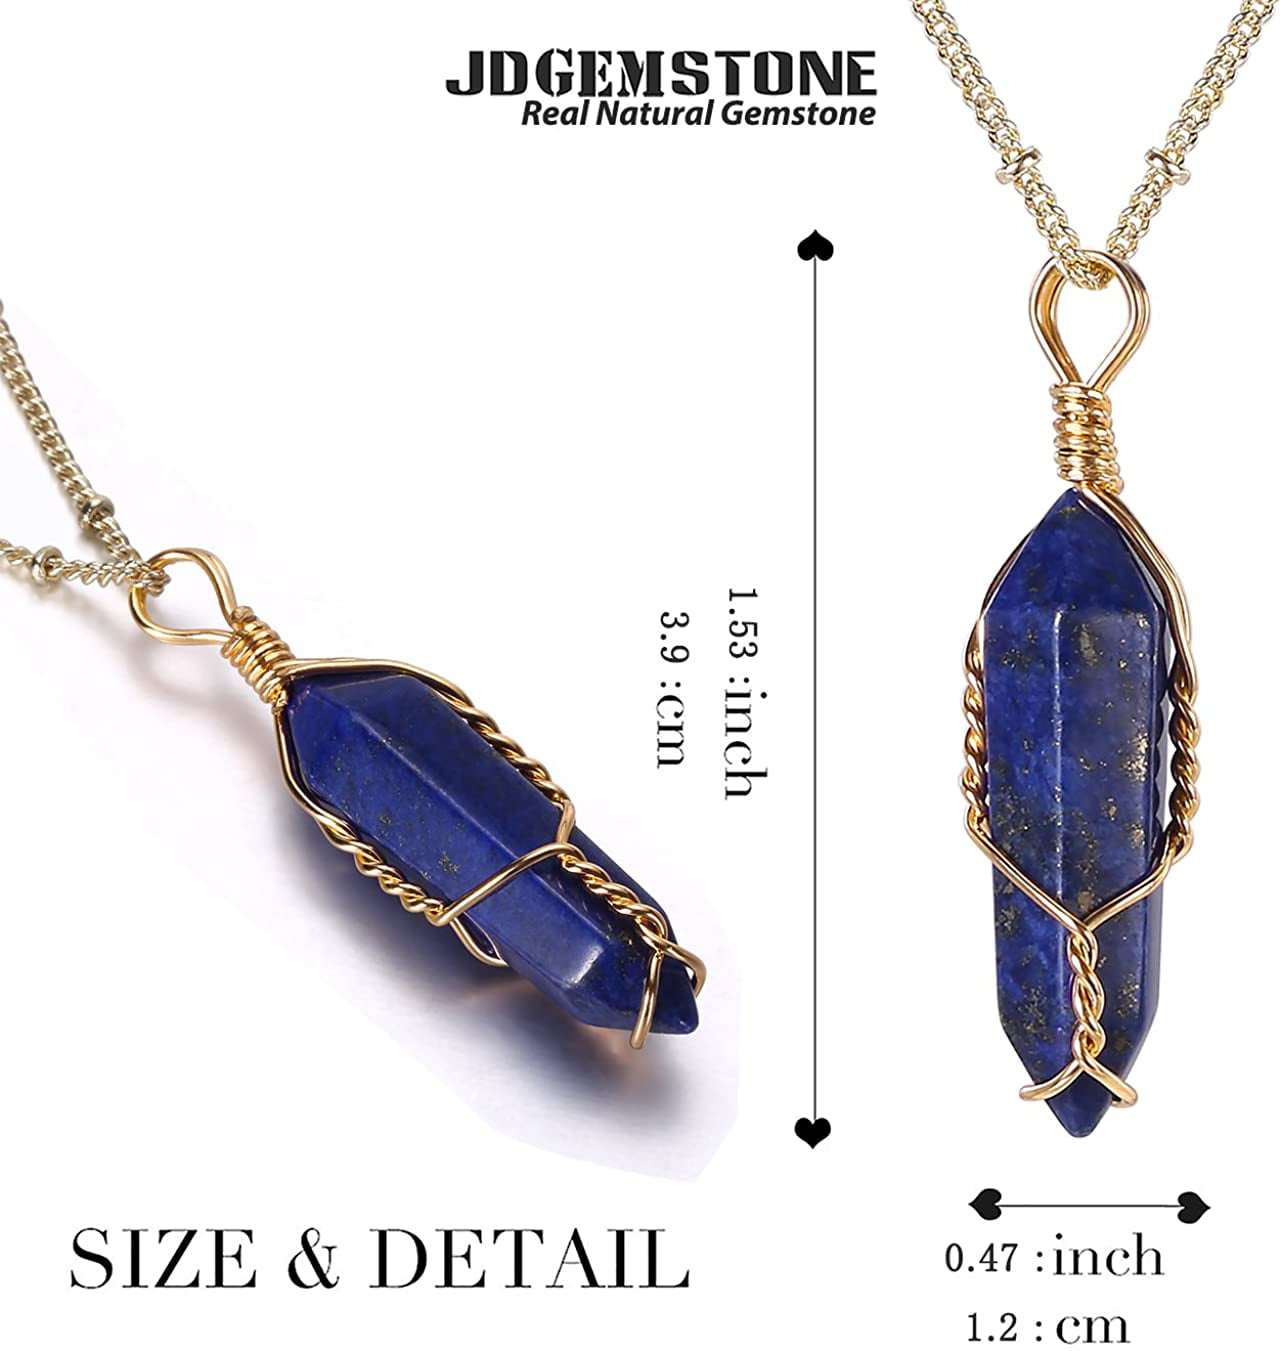 JDGEMSTONE Golden Wire Wrapped Natural Semi Precious Crystal Gemstone Pendant Necklace